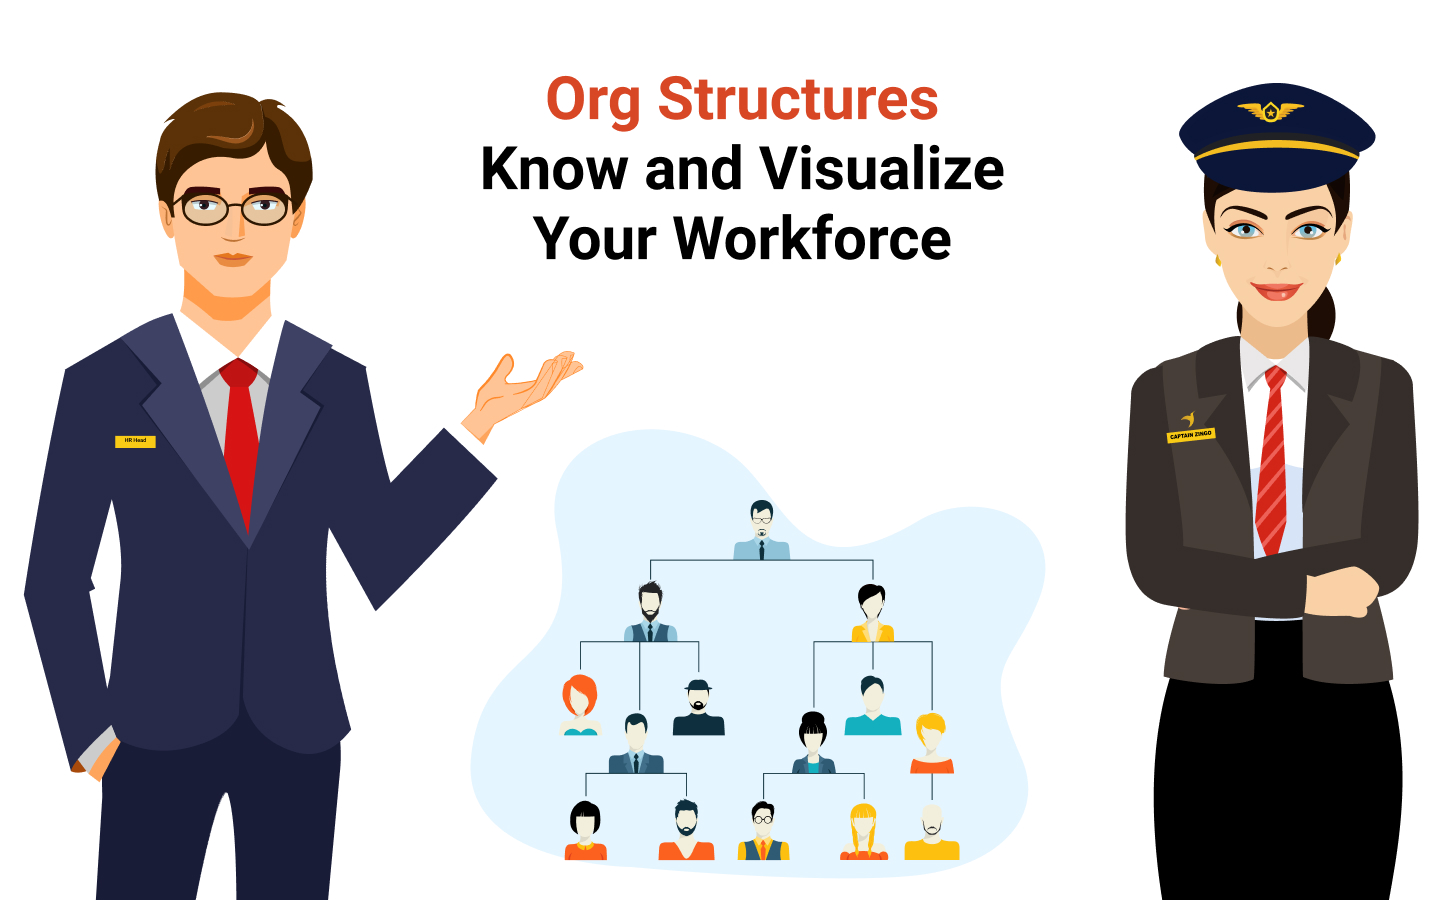 Org Structures- Know and Visualize Your Workforce